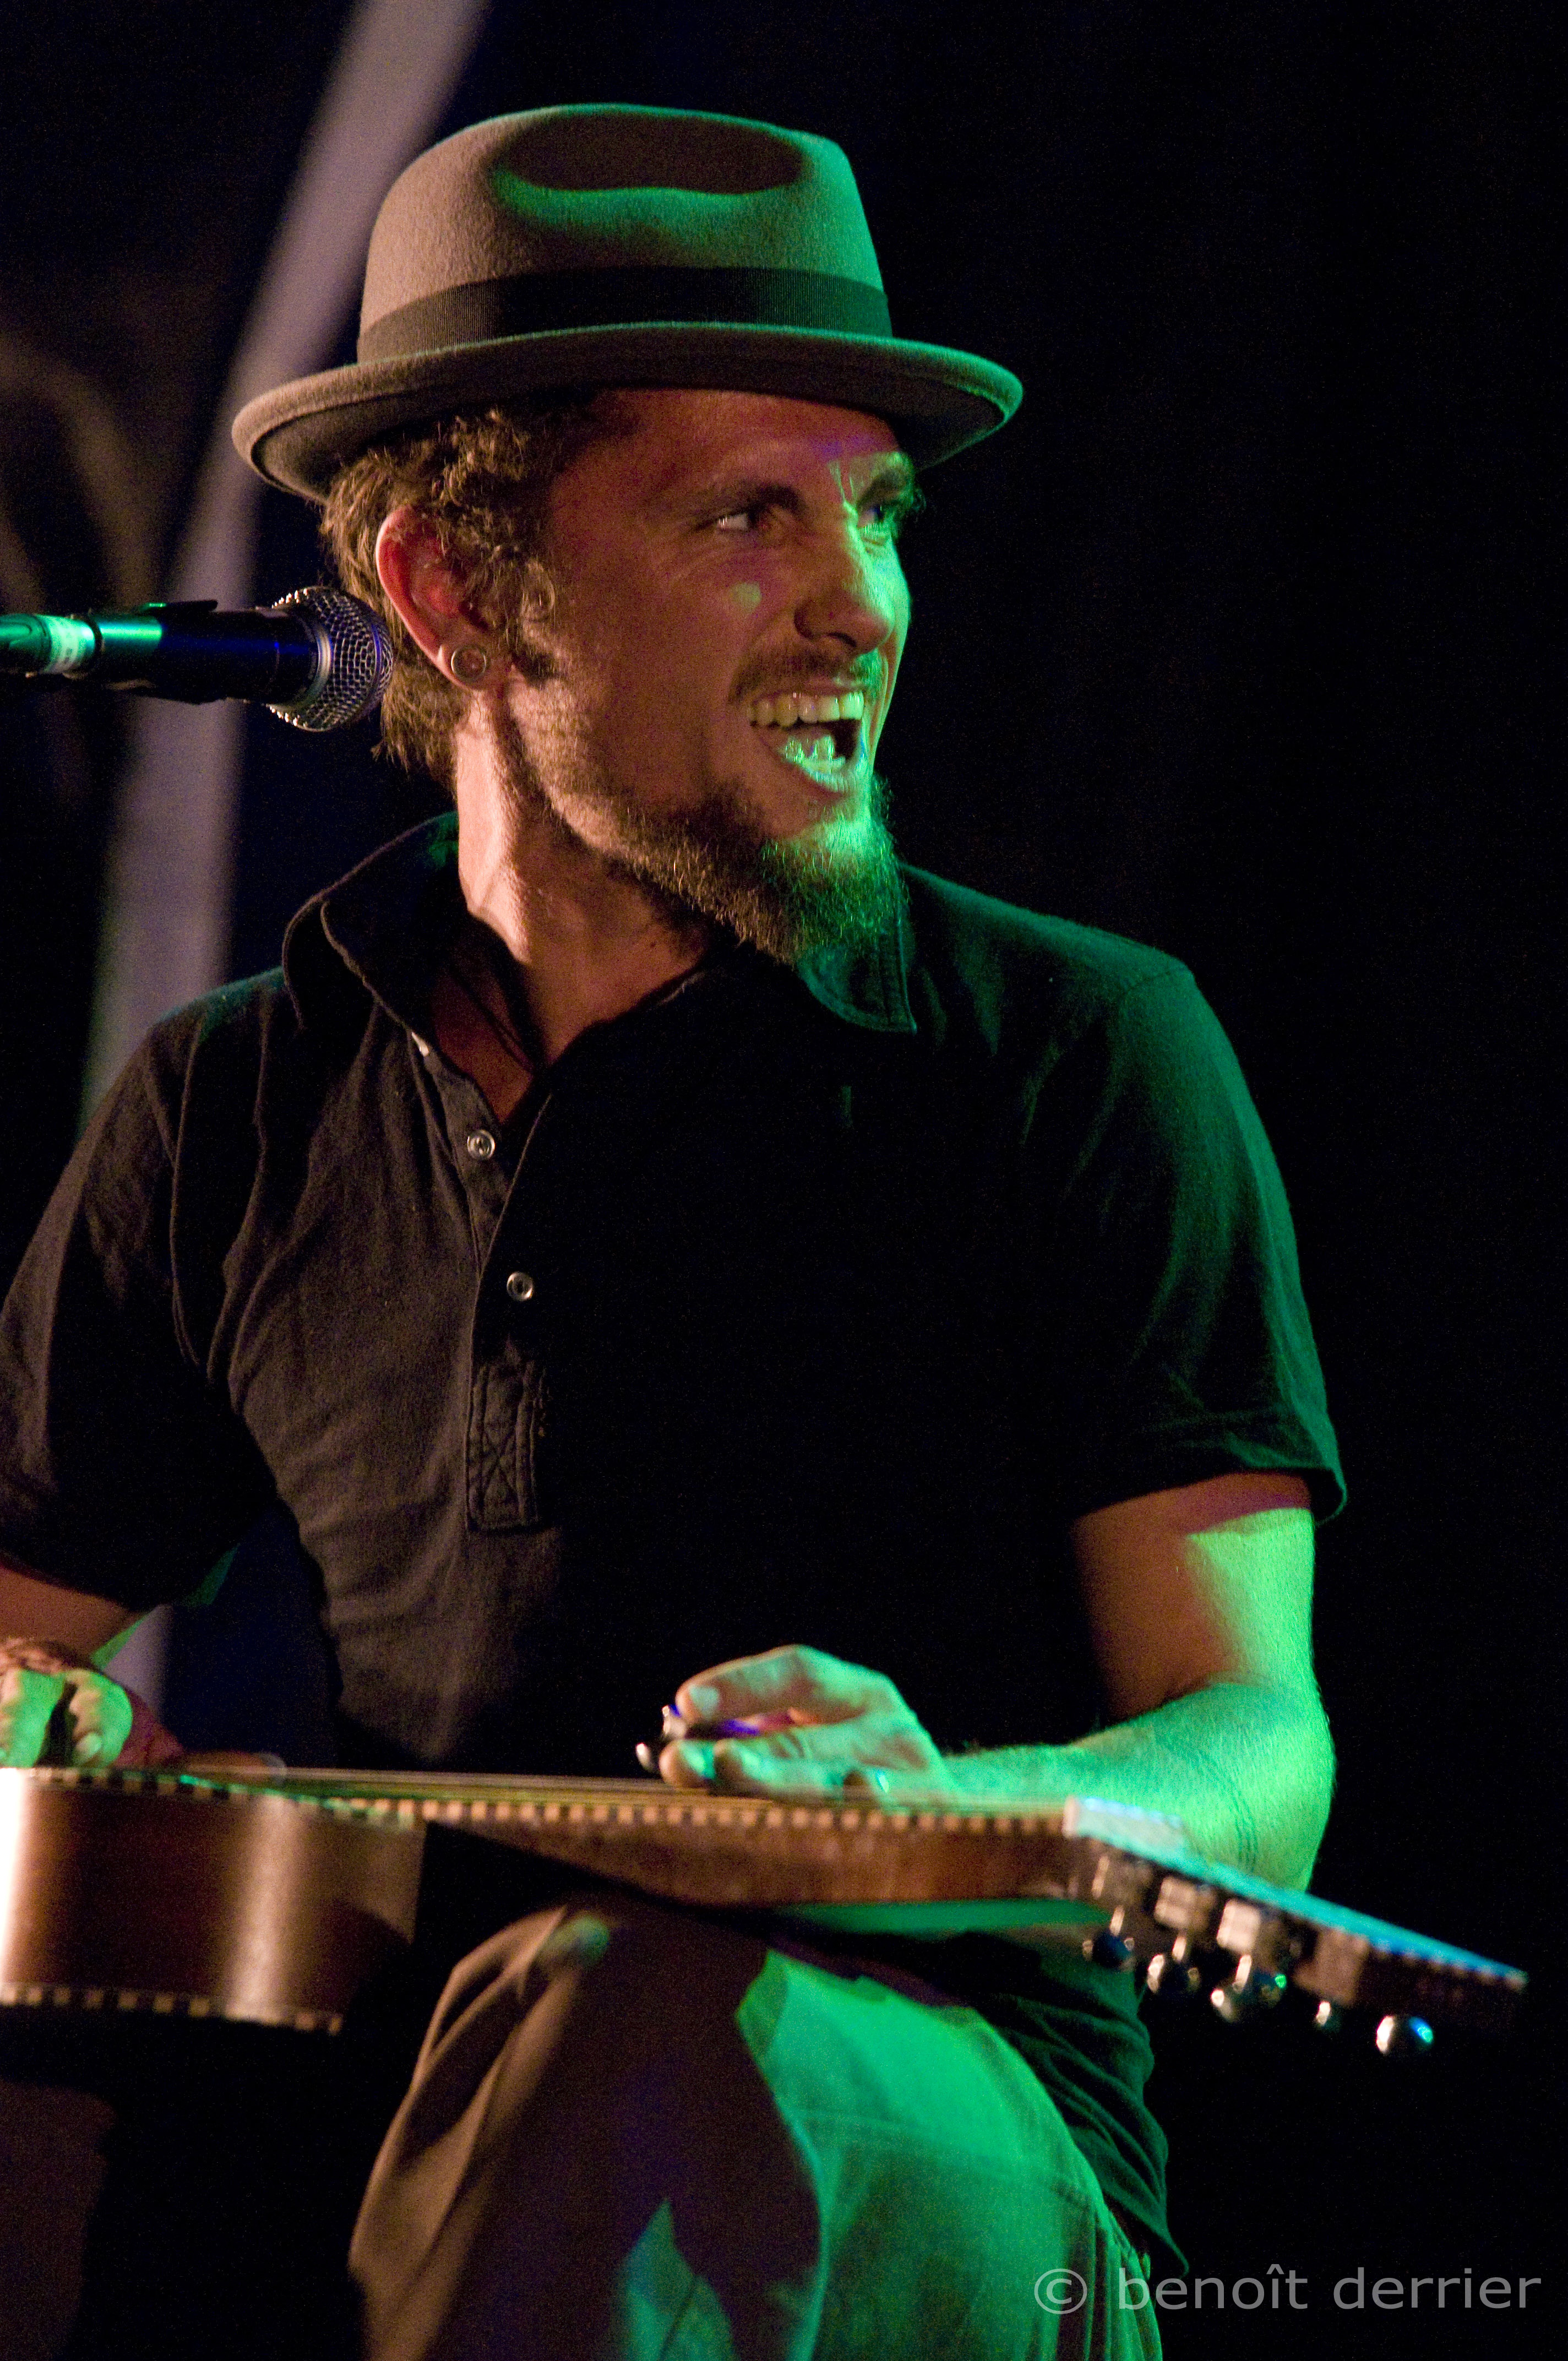 HQ The John Butler Trio Wallpapers | File 2598.18Kb